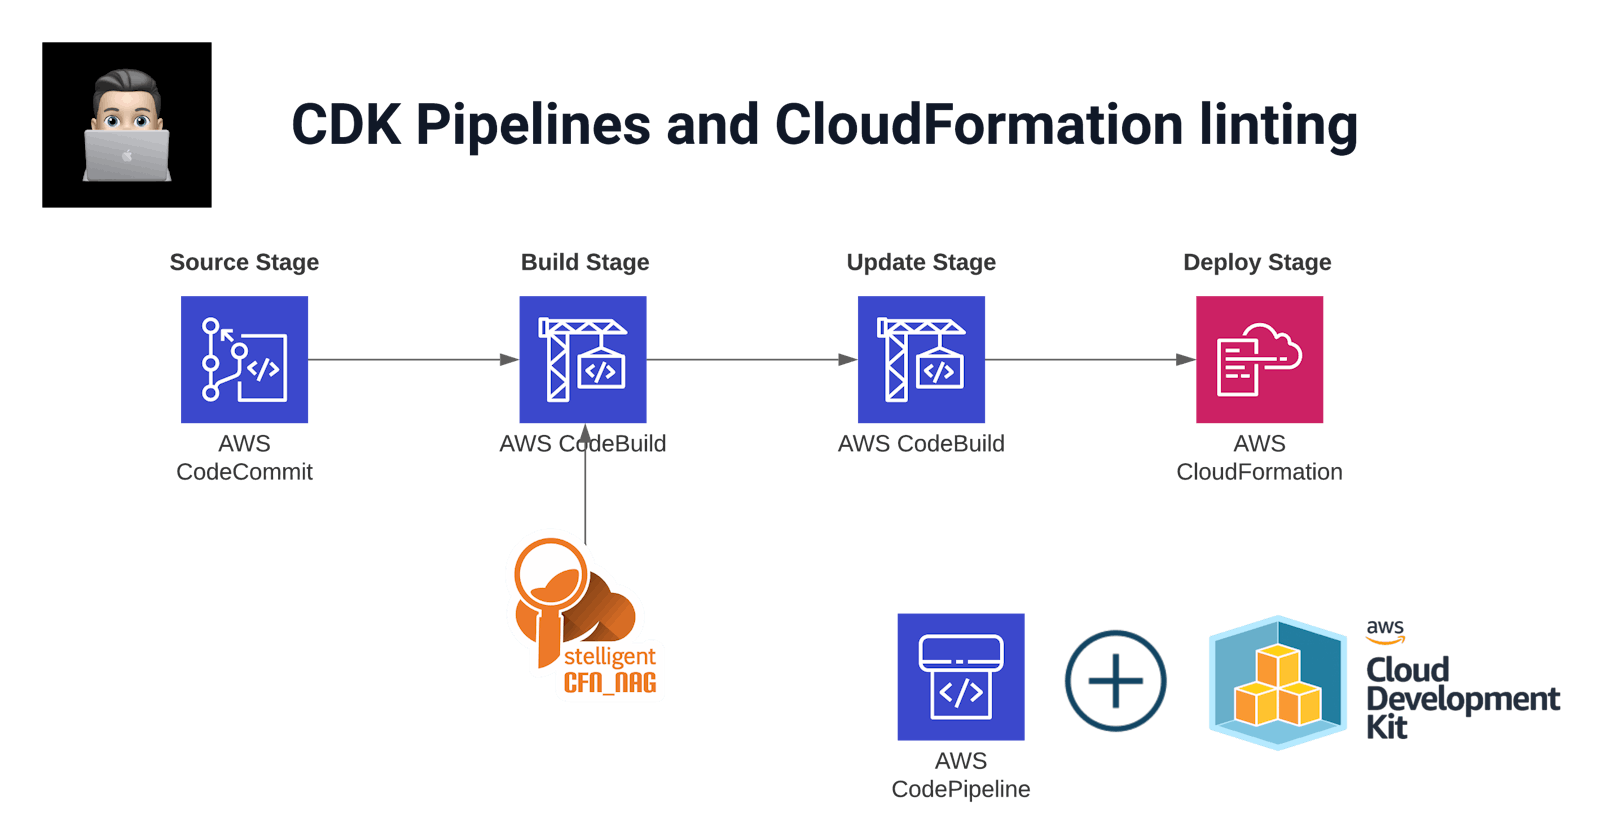 CDK Pipelines and CloudFormation linting